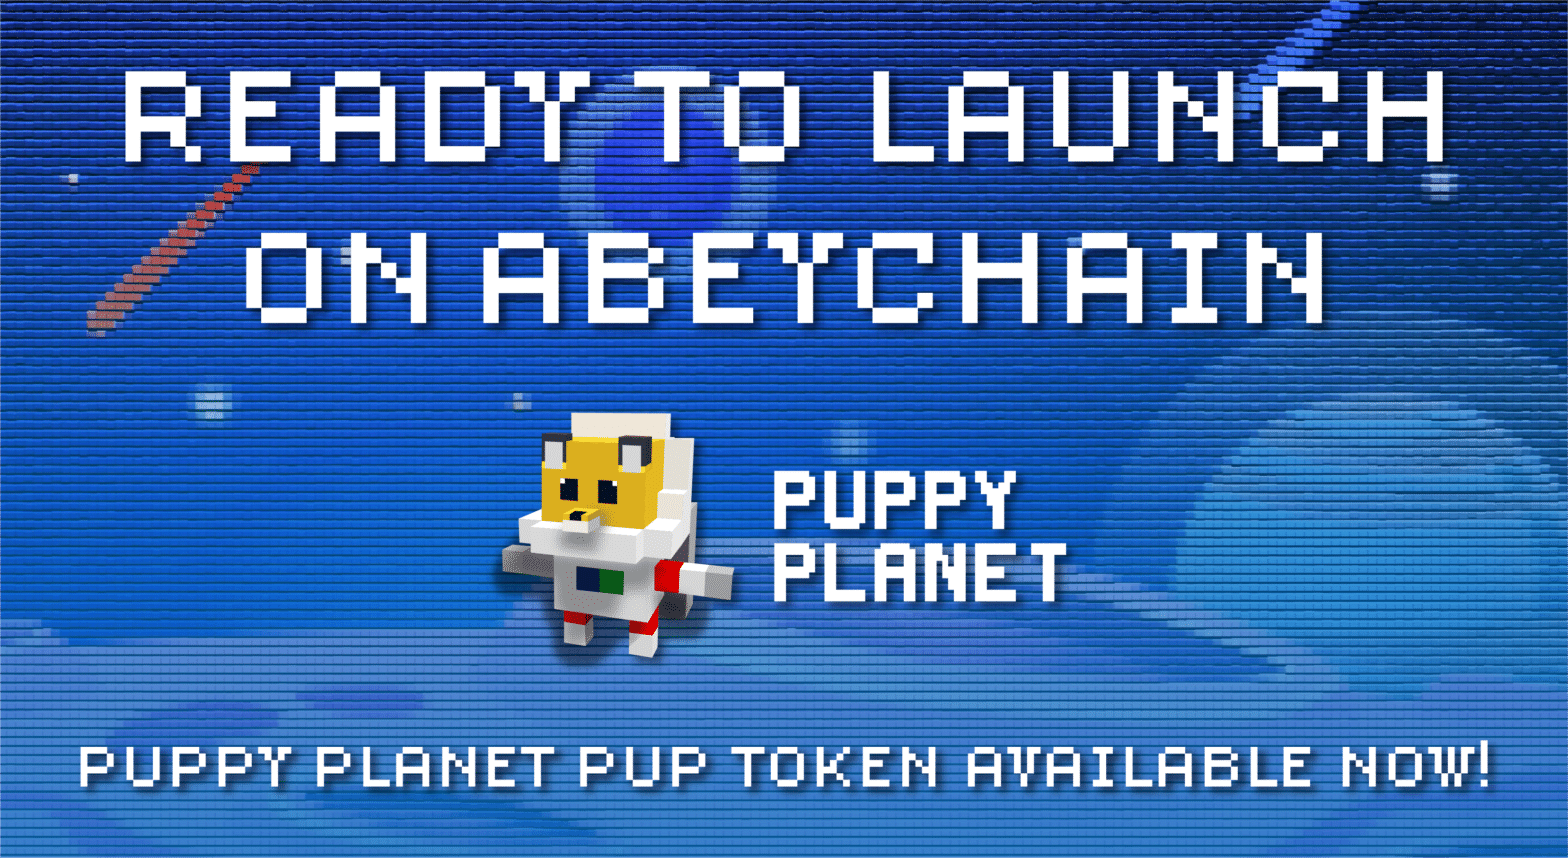 Puppy Planet sells PUP token to public in preparation of full game launching soon